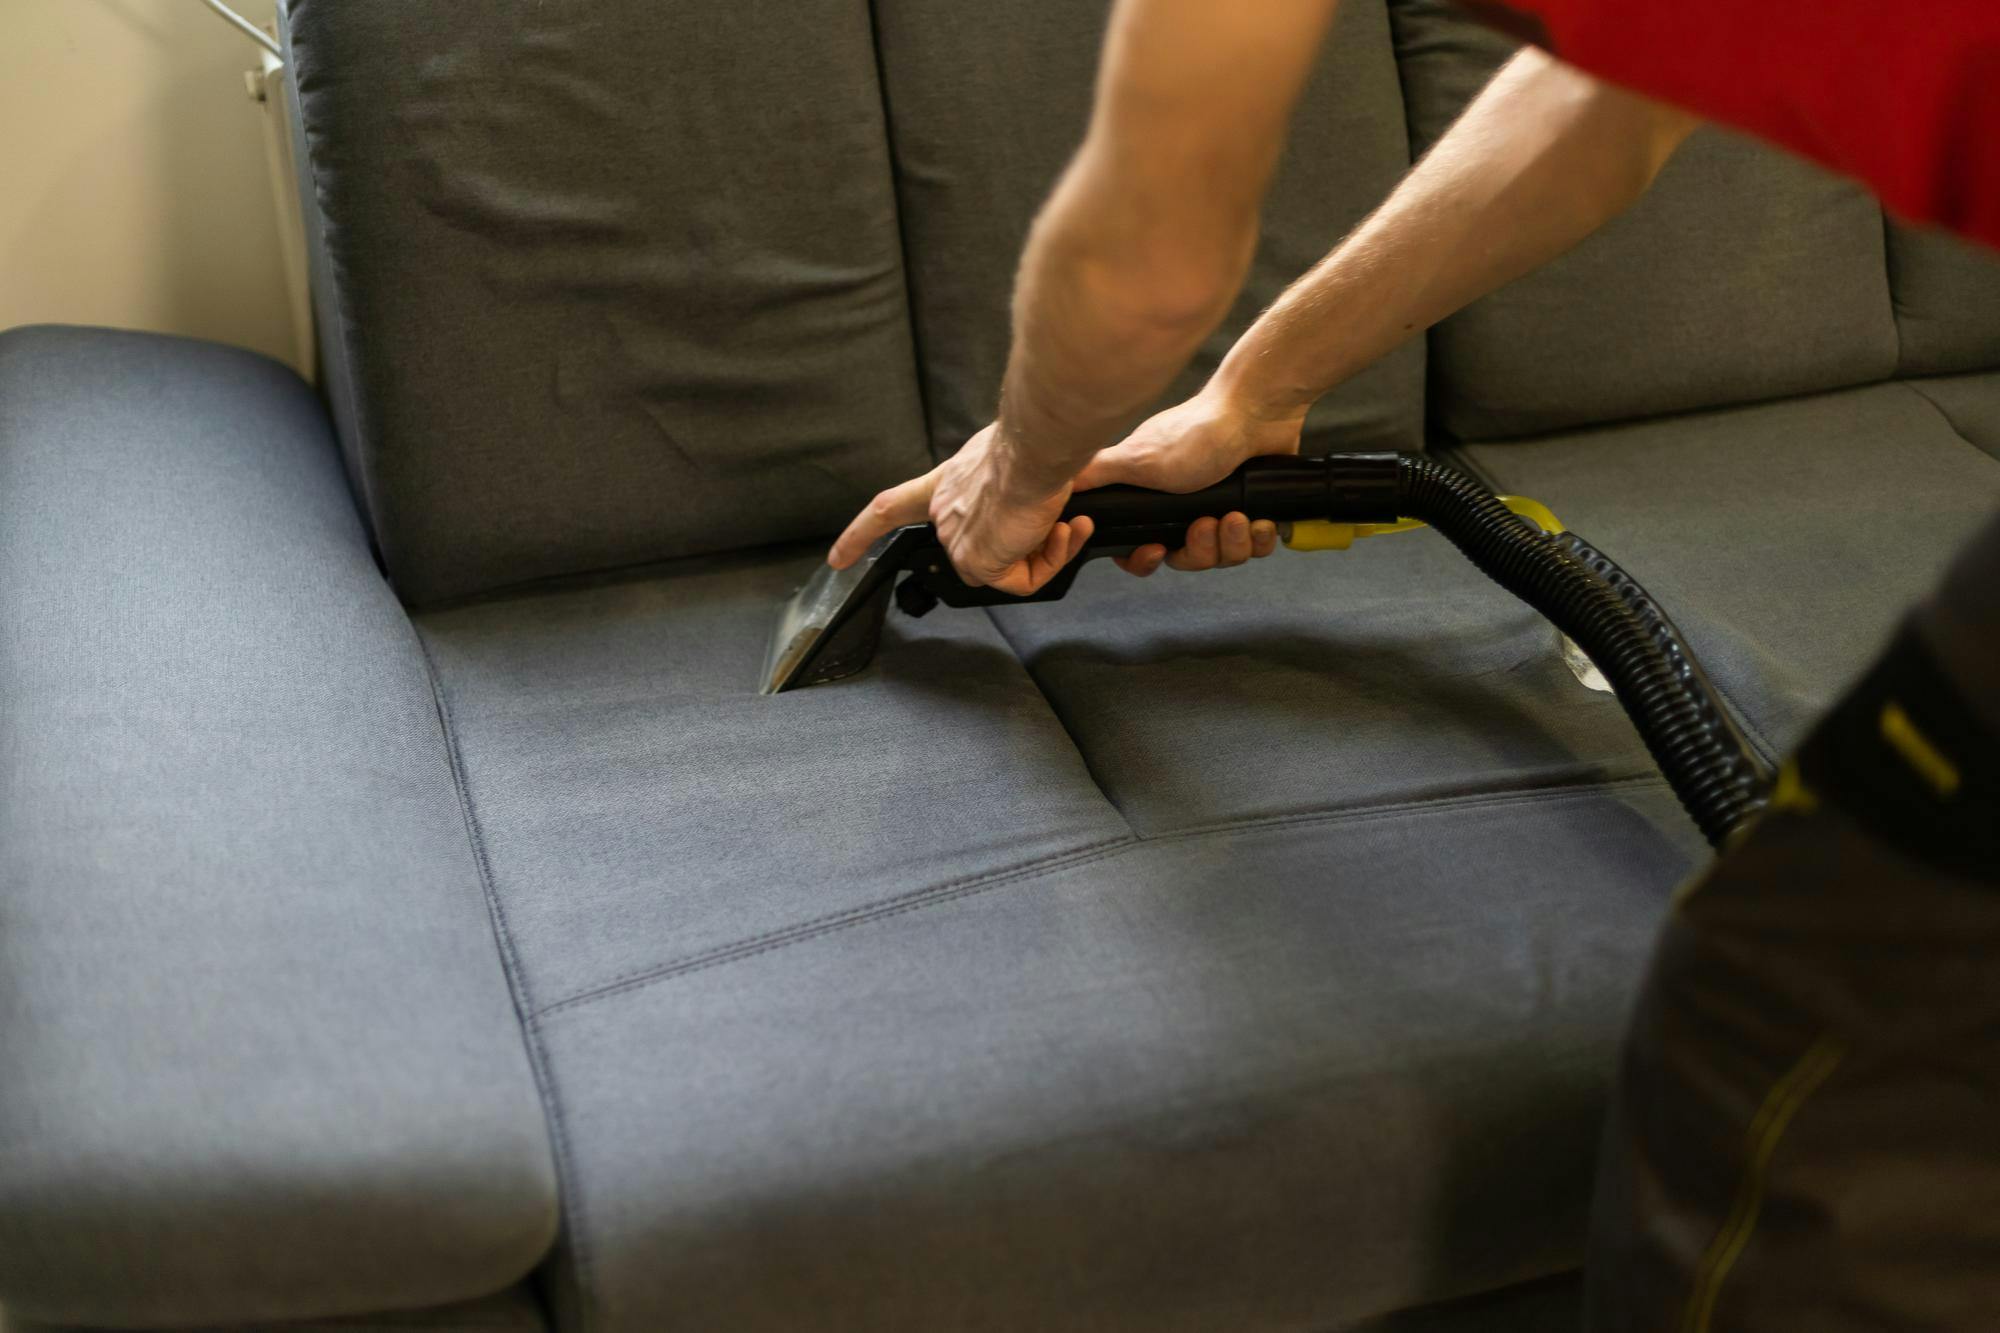 Expert Upholstery Cleaning